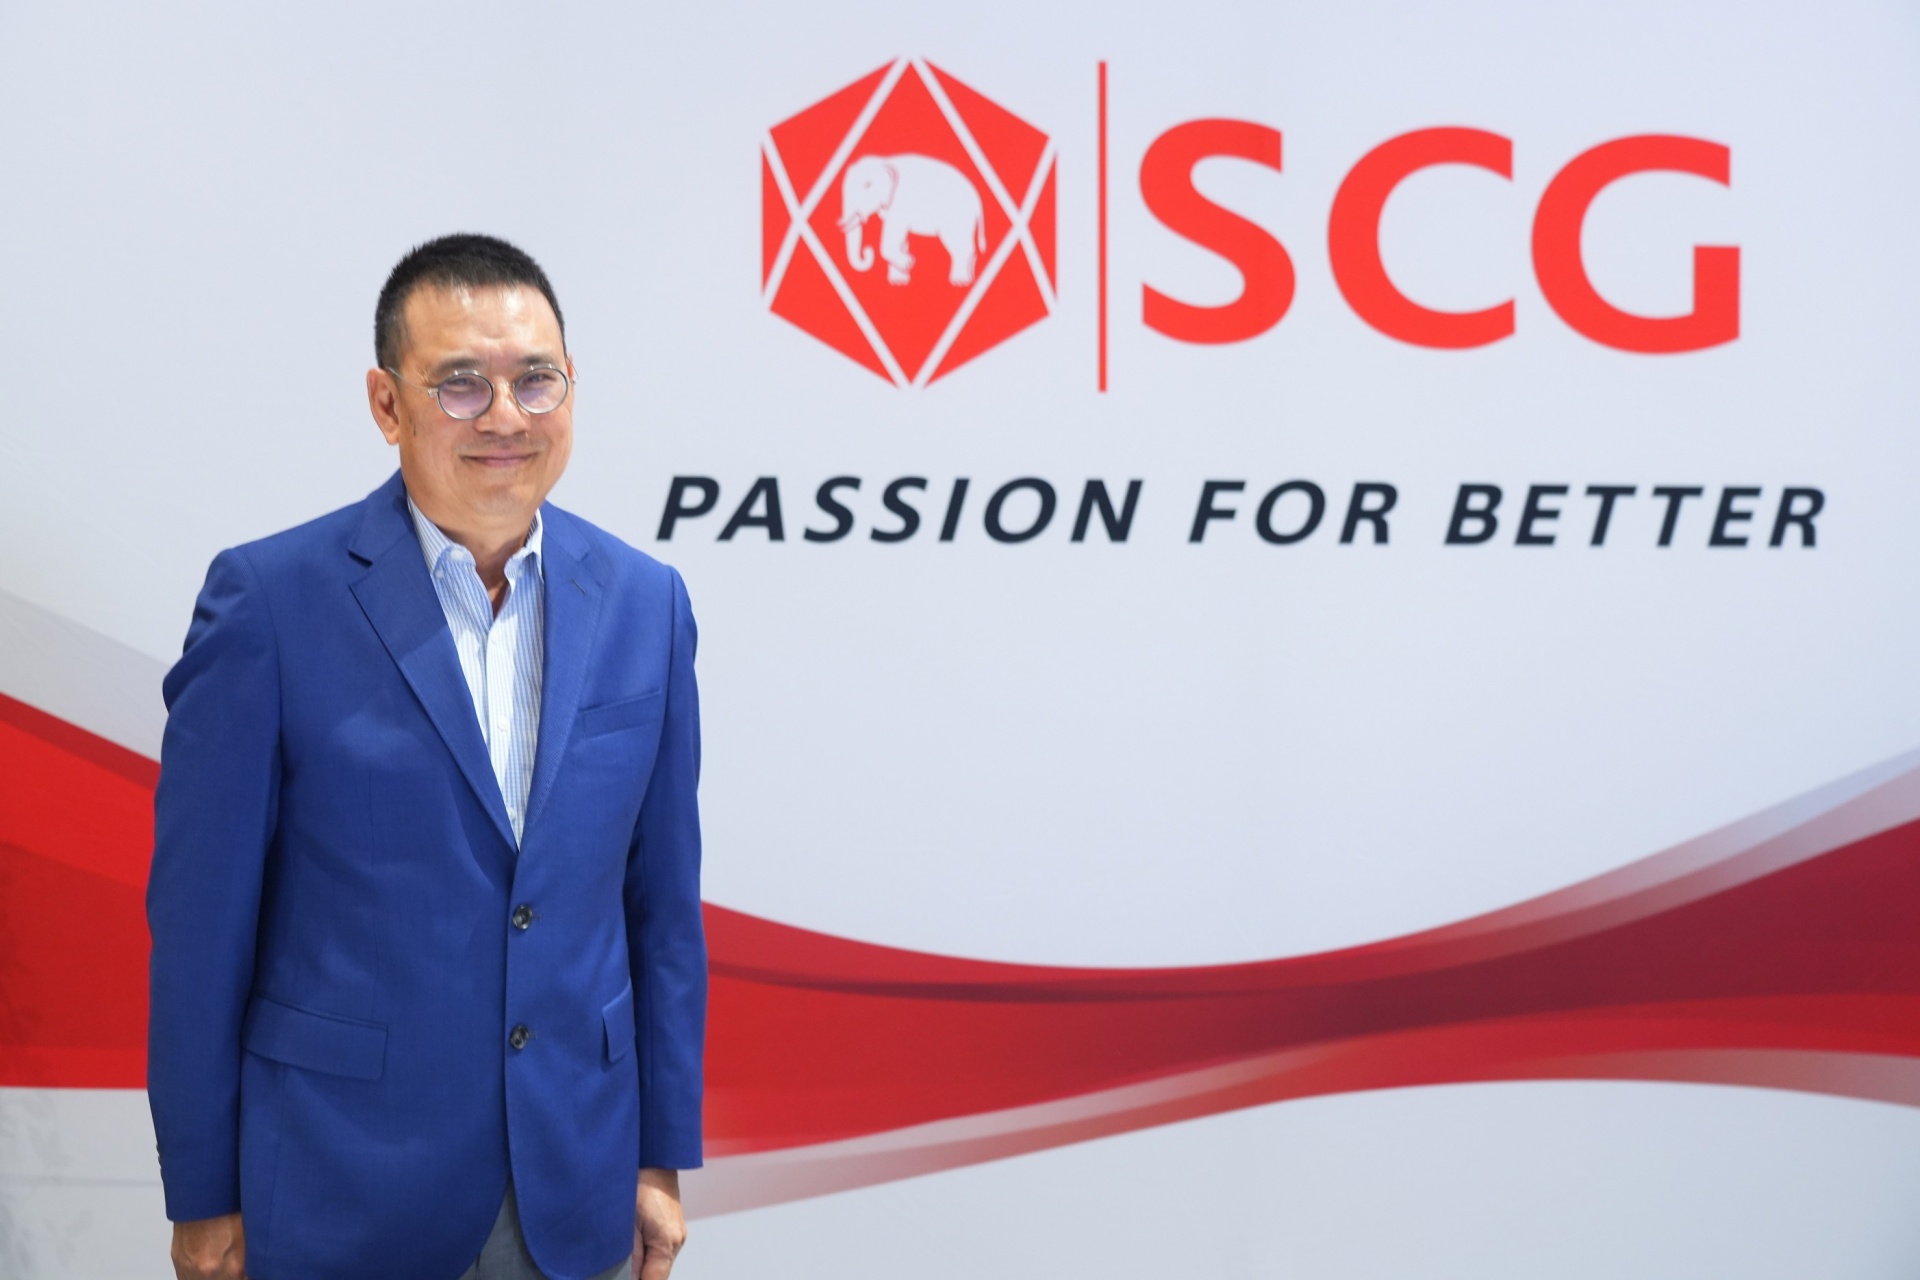 SCG posts strong operating results in 2021 despite inflation and COVID-19